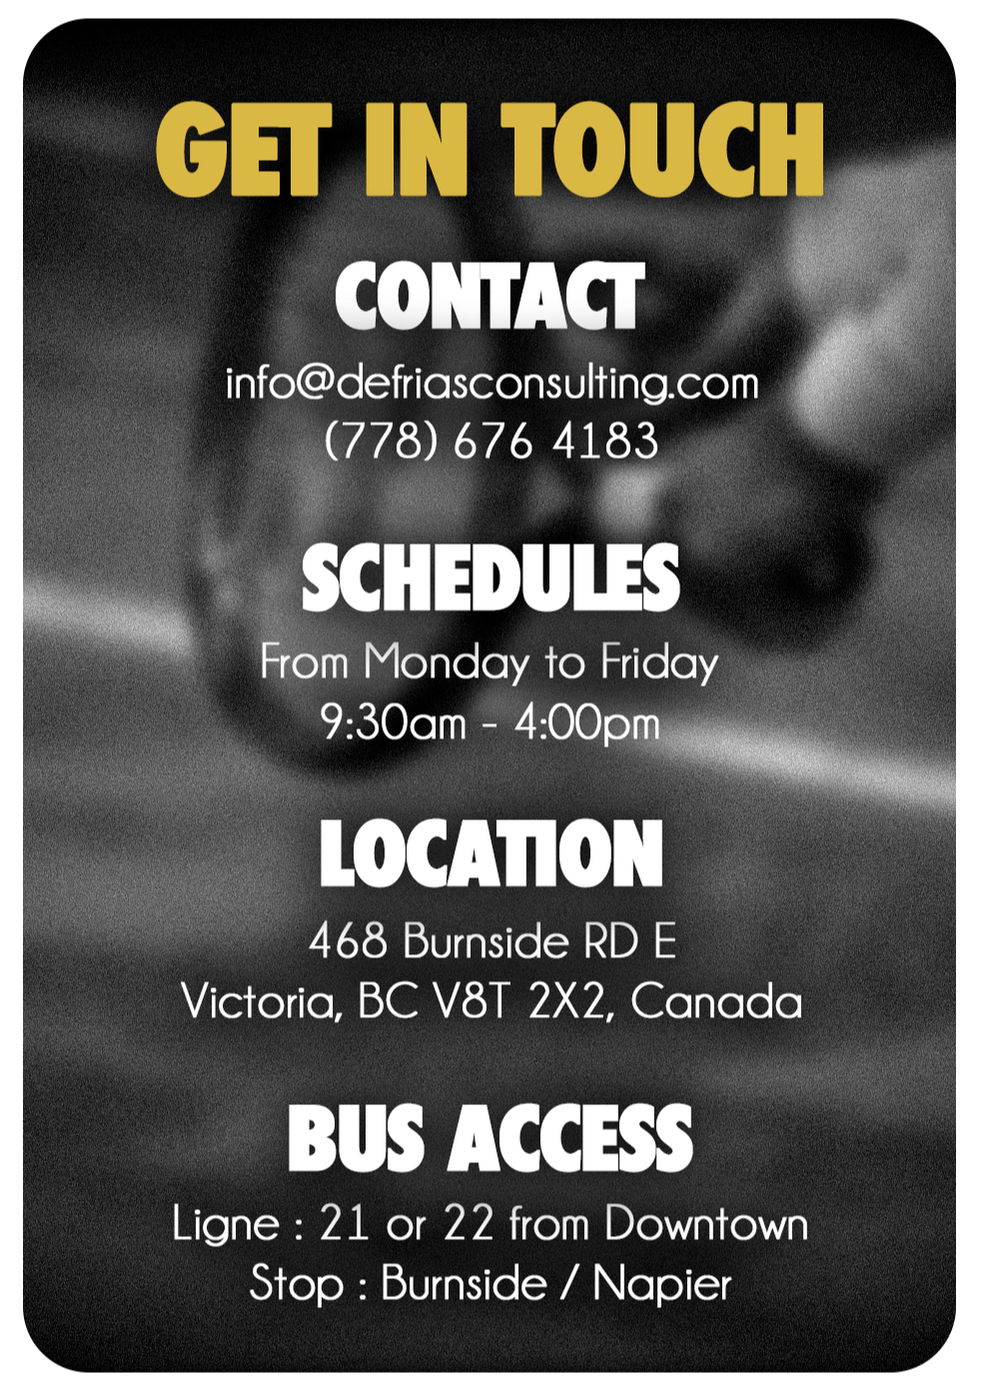 Get in Touch - Contact : info@defriasconsulting.com - (778) 676 4183 - Schedules : From Monday to Friday - 9:30am - 4:00pm - Location : 468 Burnside RD E - Victoria, BC V8T 2X2, Canada - Bus Access : Ligne : 21 or 22 from Downtown - Stop : Burnside / Napier